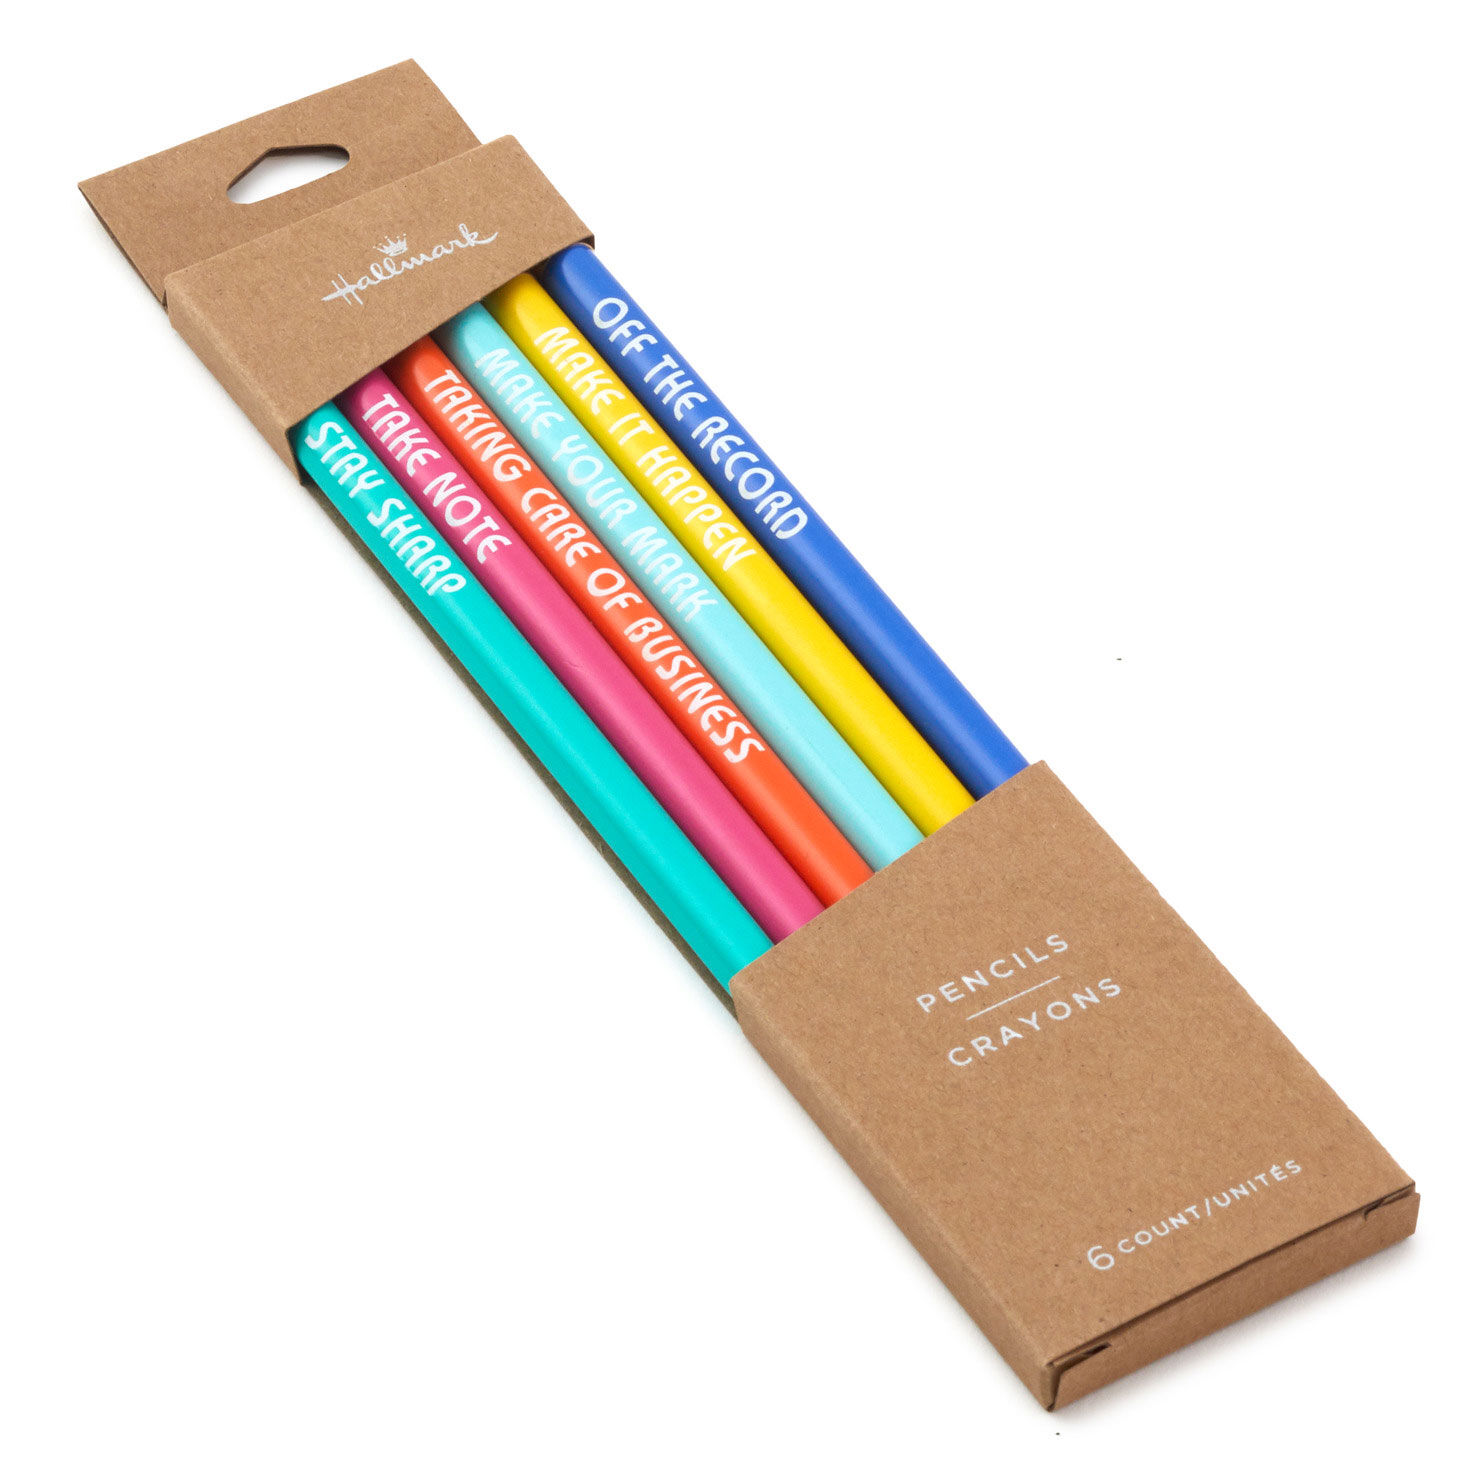 Motivating Messages Wooden Pencils, Pack of 6 for only USD 9.99 | Hallmark